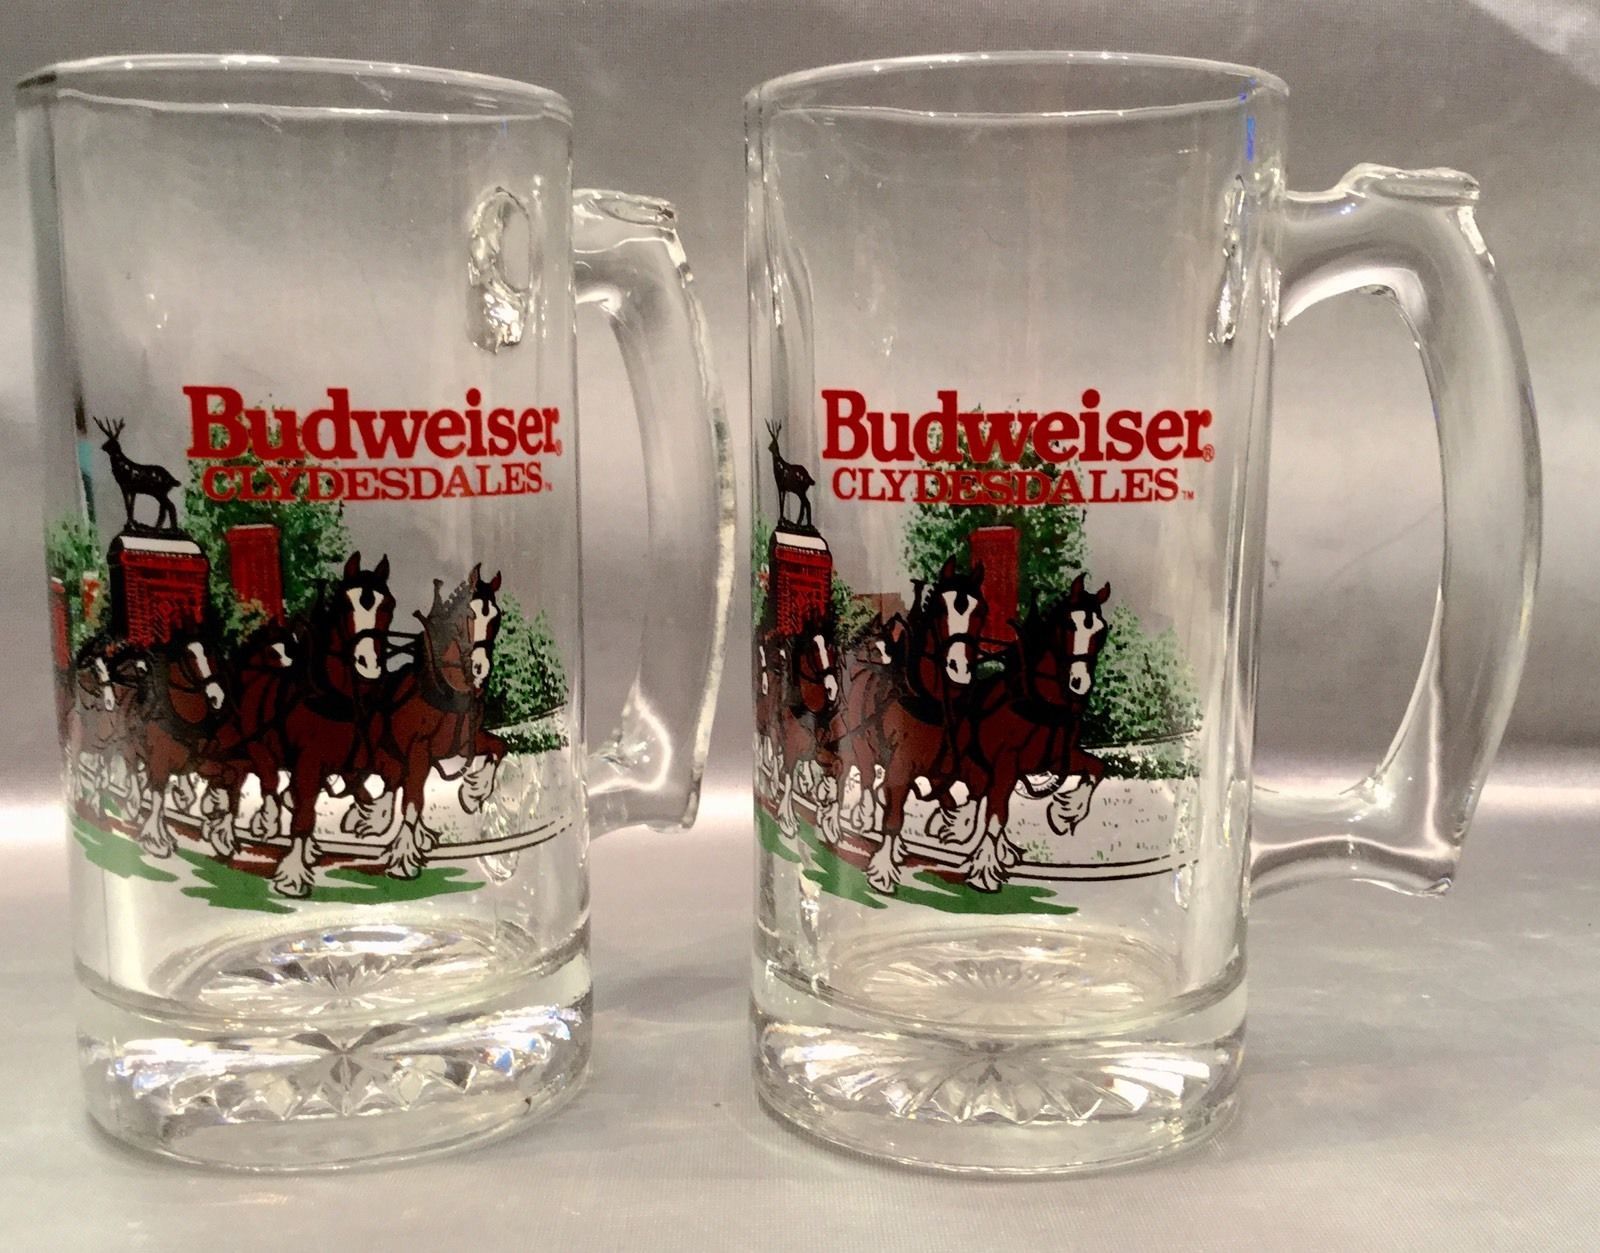 Primary image for Budweiser CLYDESDALES 1991 Grant's Farm Clear Glass Beer Mugs Set Of 3 -MANCAVE!